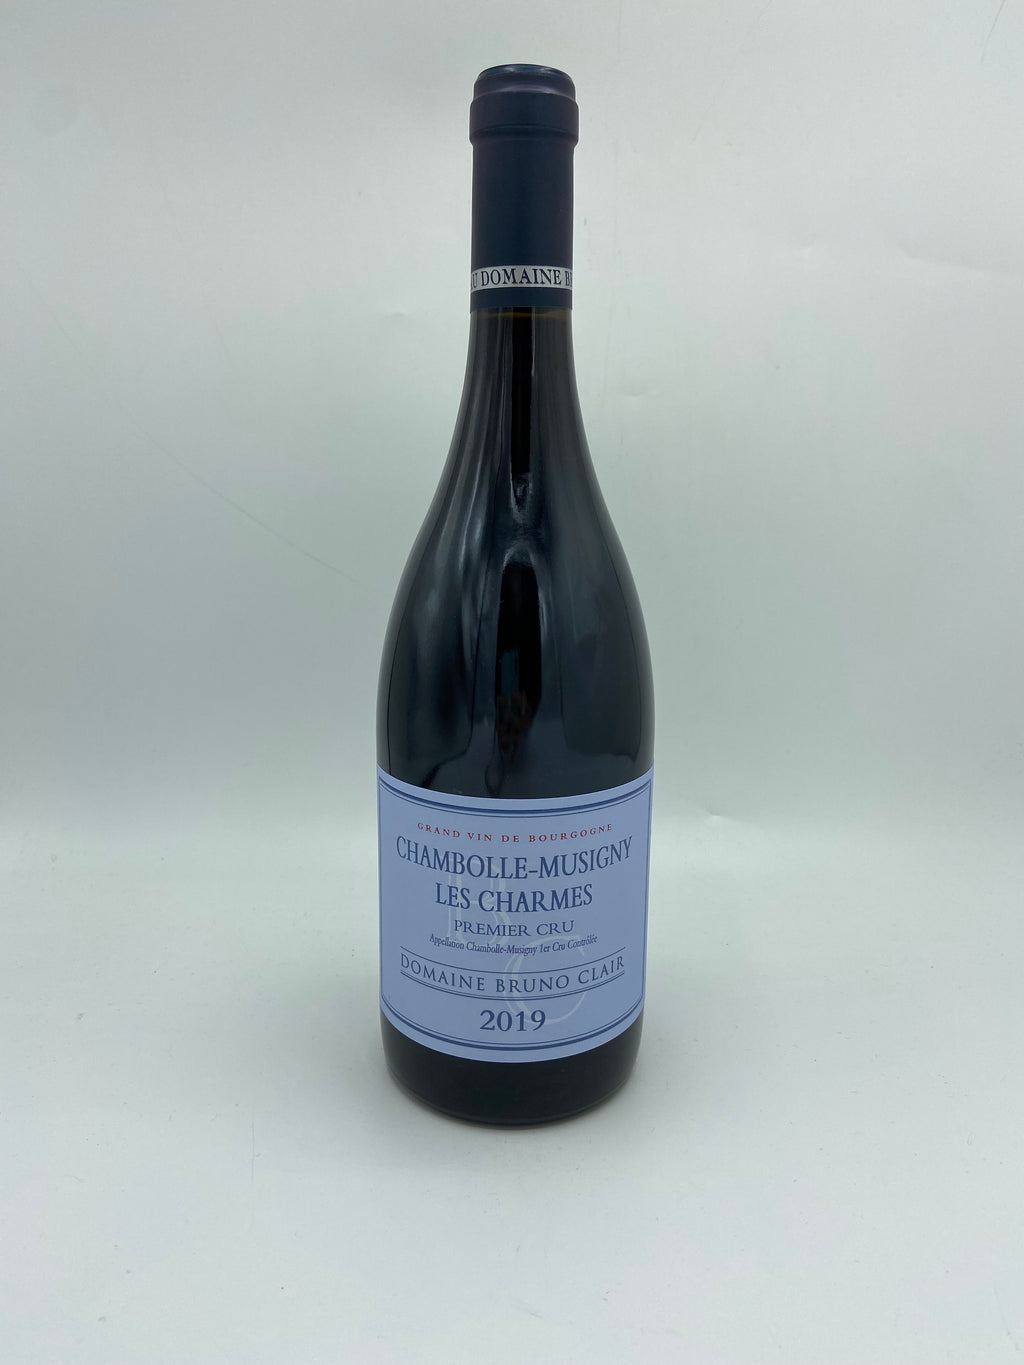 Chambolle Musigny 1er cru "Les Charmes" 2019 Rouge - Domaine Bruno Clair